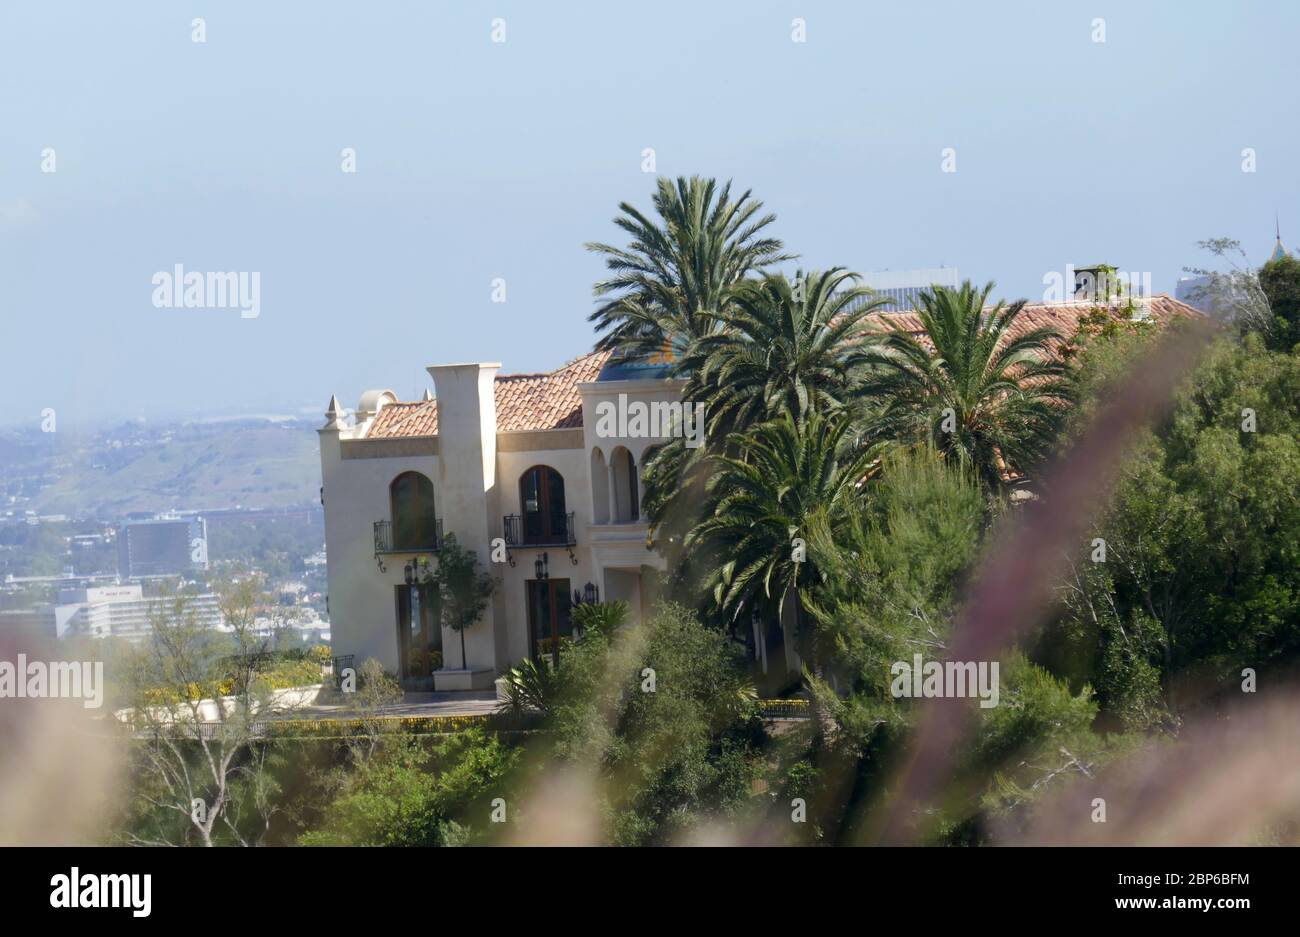 Beverly Hills, California, USA 17th May 2020 A general view of atmosphere of 10066 Cielo Drive where Shaton Tate Lived and Mansion Murders took place (formerly 10050 Cielo Drive) on May 17, 2020 in Beverly Hills, California, USA. Photo by Barry King/Alamy Stock Photo Stock Photo